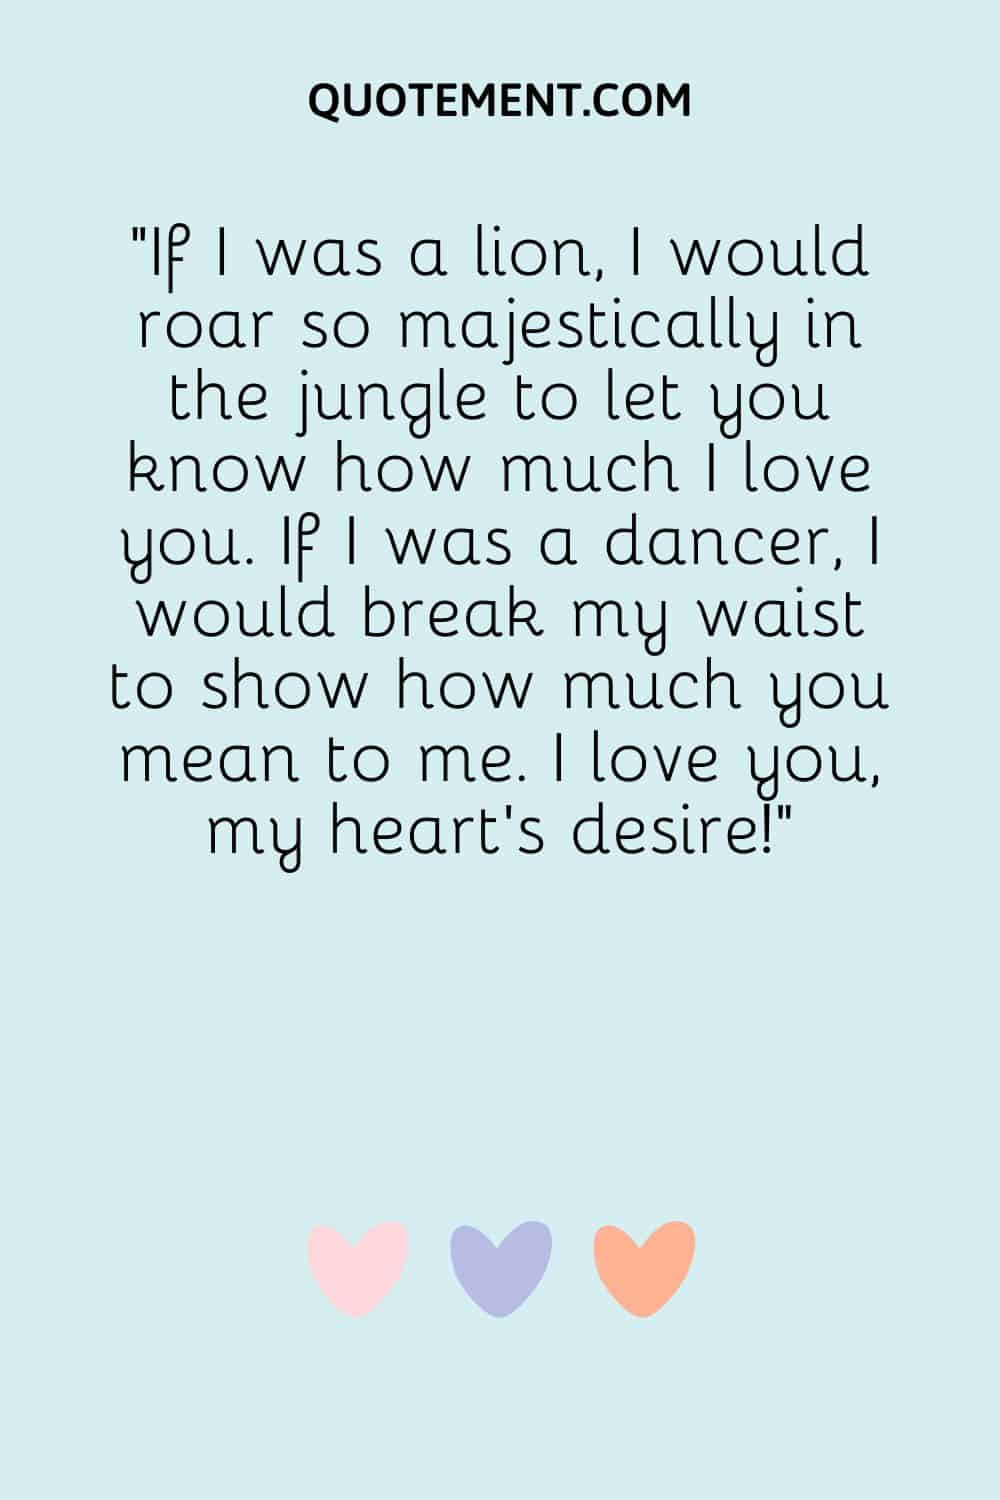 If I was a lion, I would roar so majestically in the jungle to let you know how much I love you